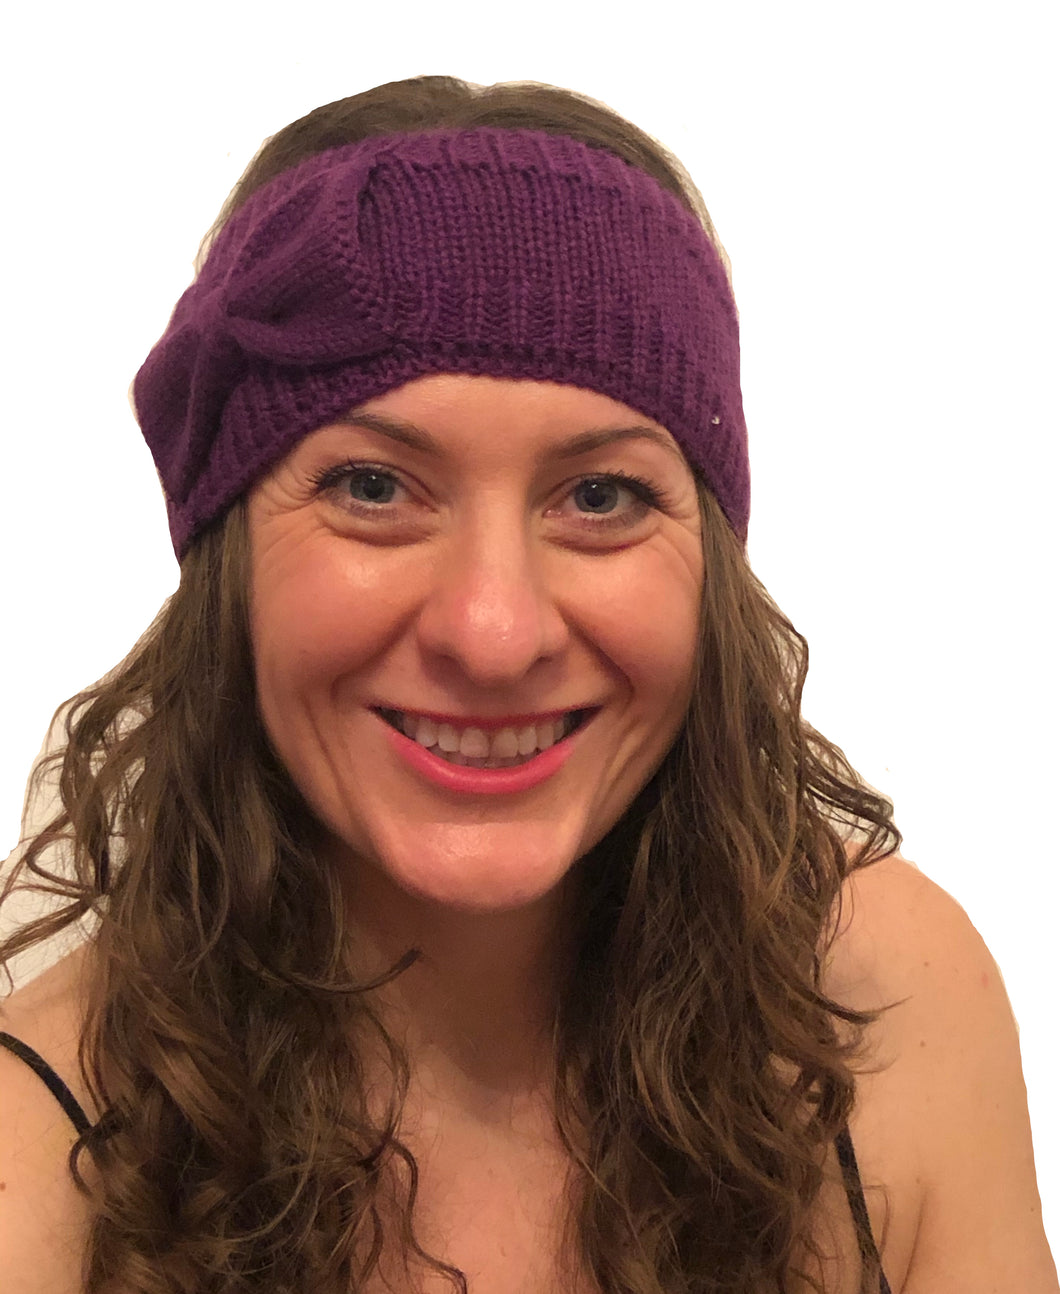 Purple woollen machine knitted headband with bow. Lovely to keep your head warm in the winter.